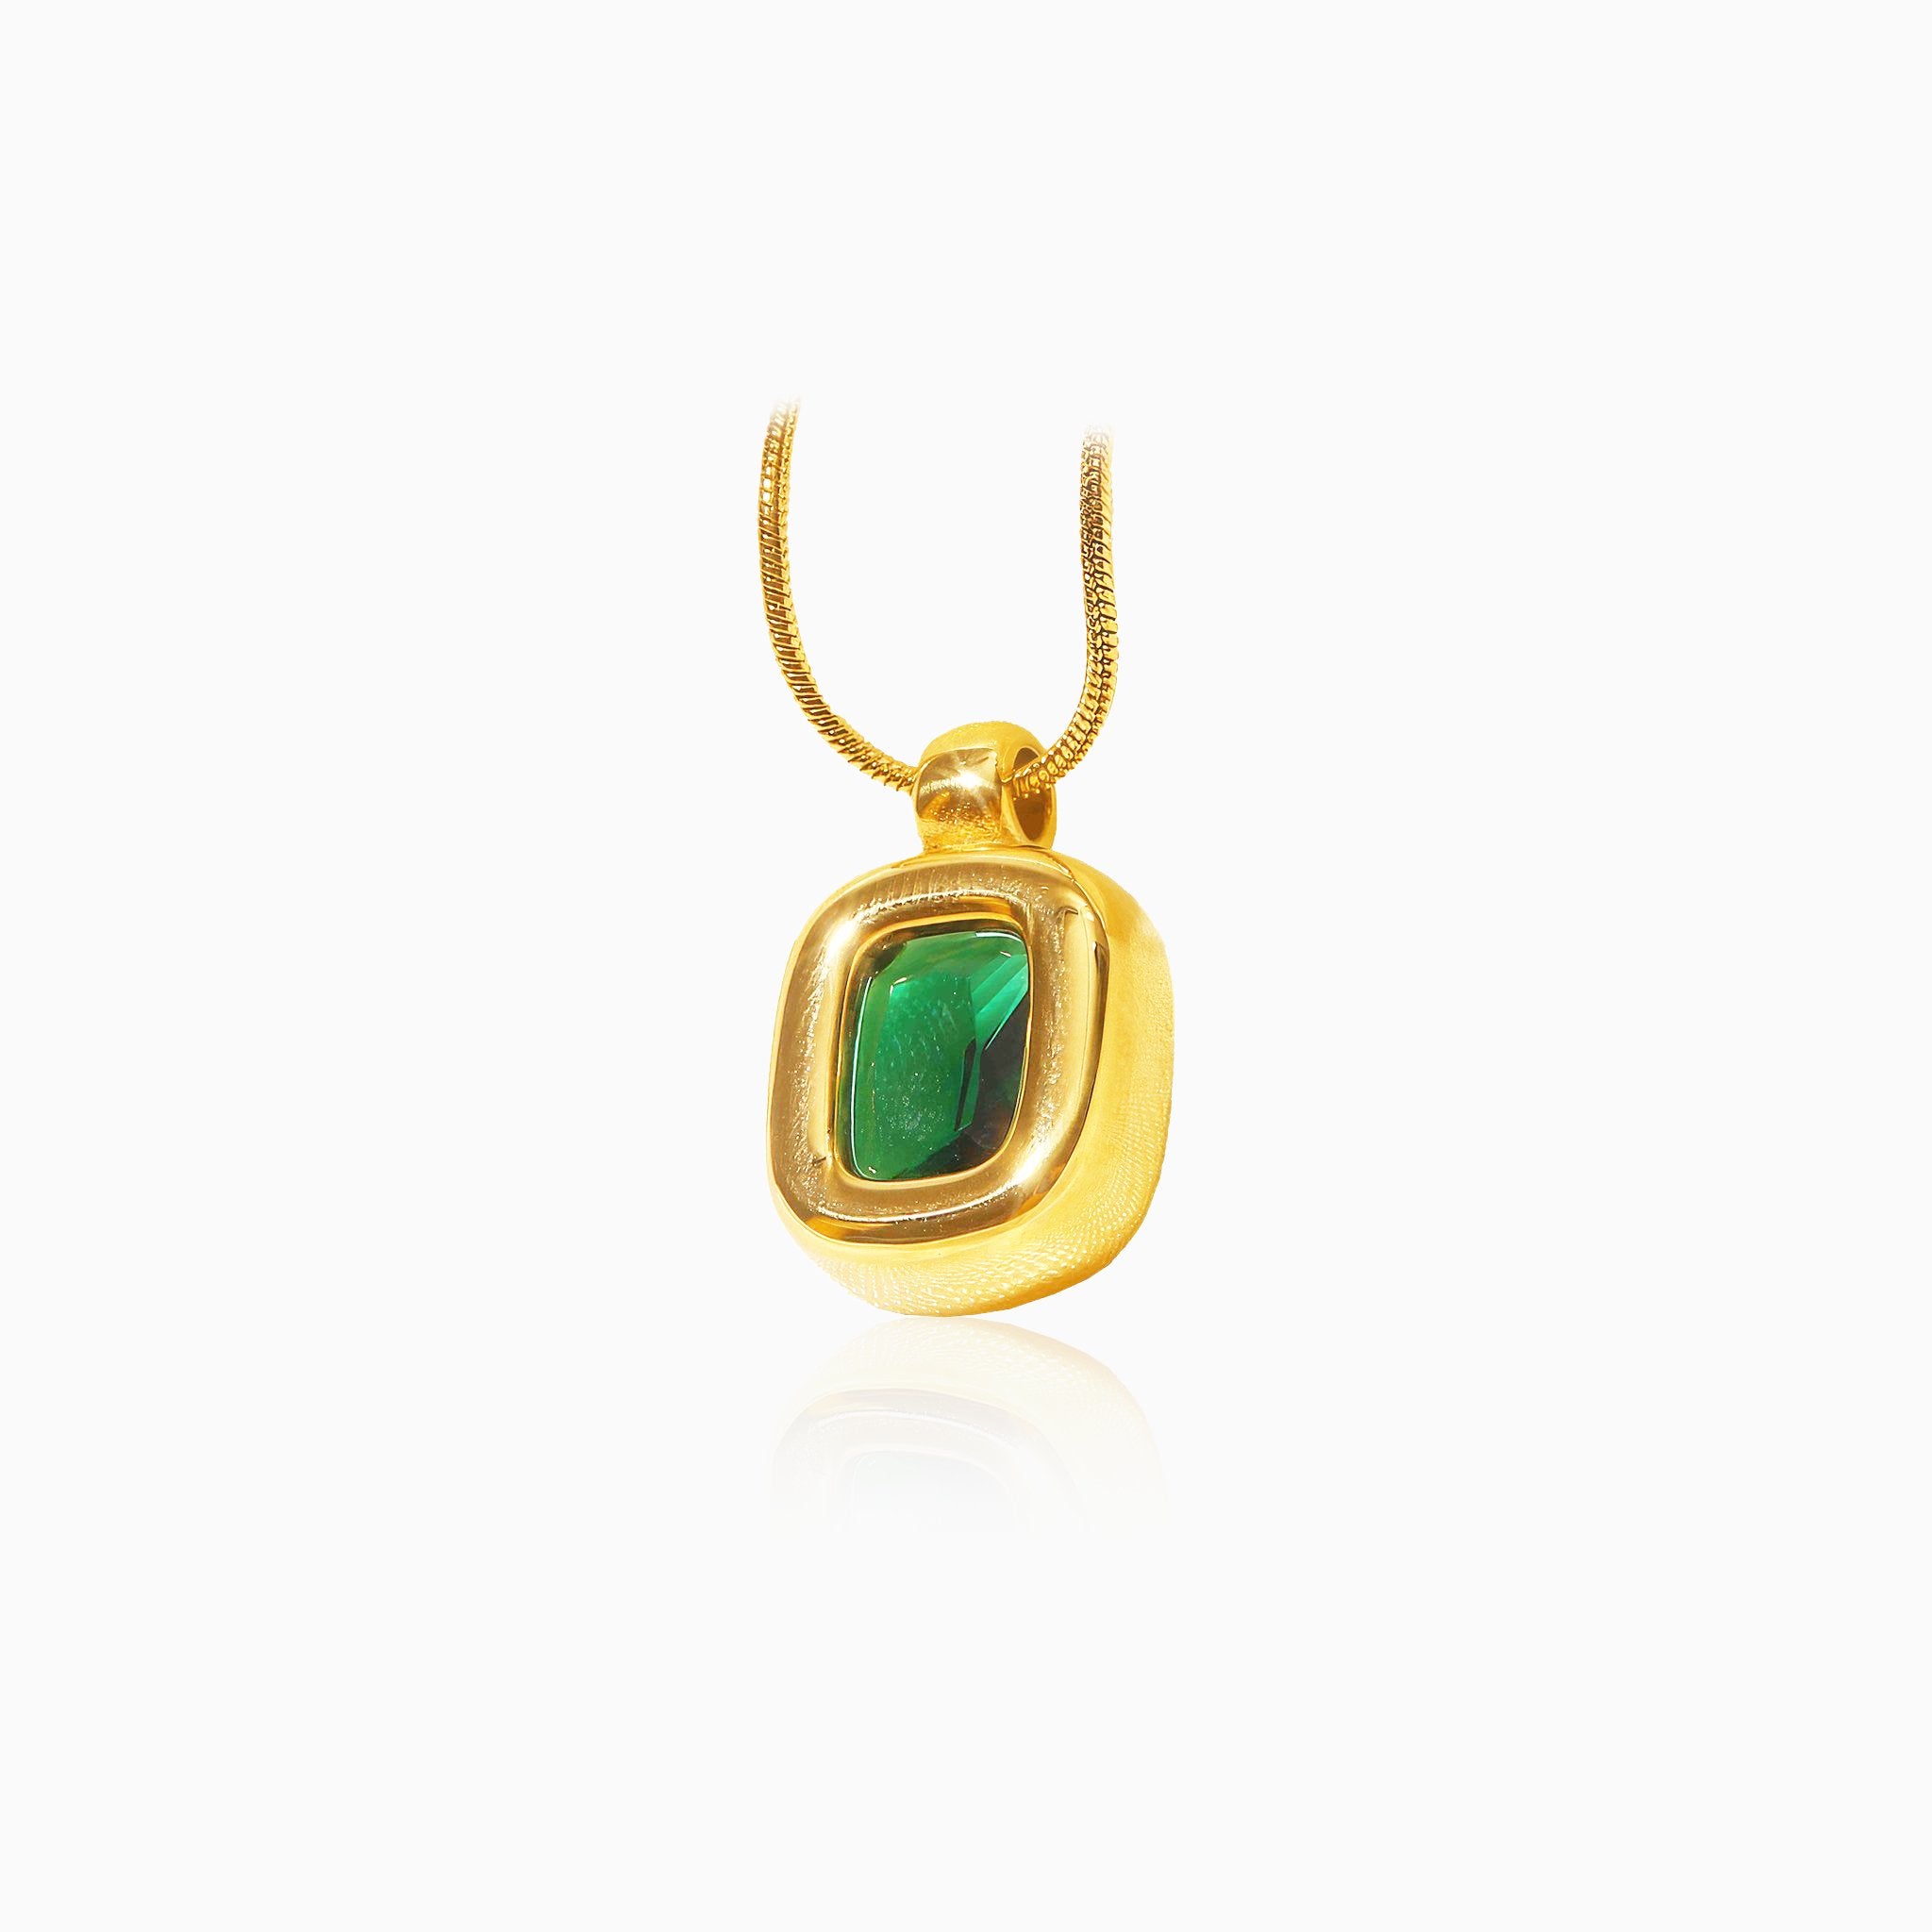 Geometric Pendant Necklace with Green Gemstone - Nobbier - Necklace - 18K Gold And Titanium PVD Coated Jewelry